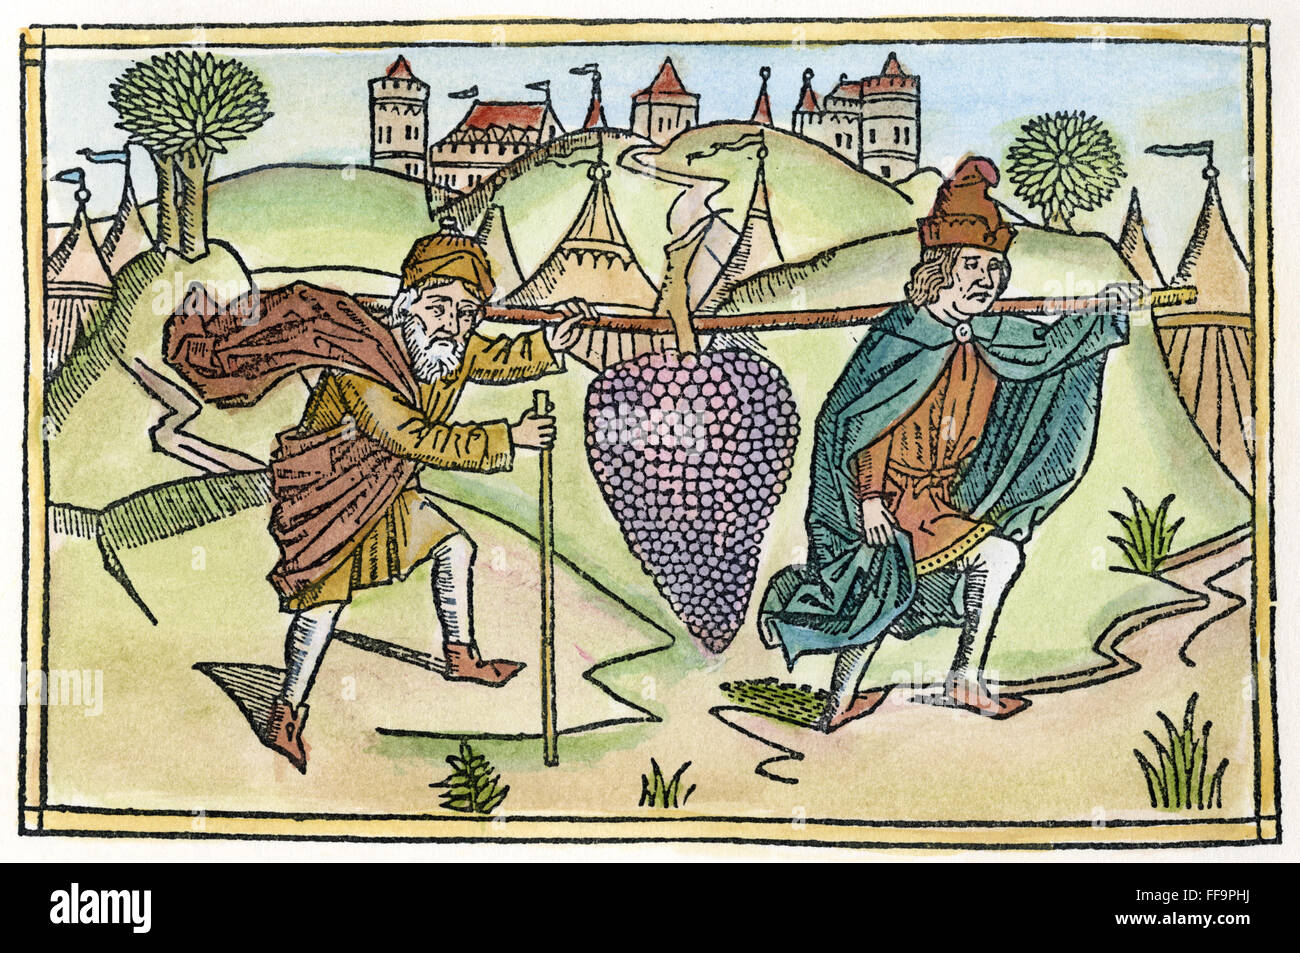 SPIES SENT TO CANAAN. /nThe spies sent to scout the land of Canaan return with a bunch of grapes so large it takes two men to carry it (Numbers 13: 23-27). Woodcut from the Cologne Bible, 1478-80. Stock Photo